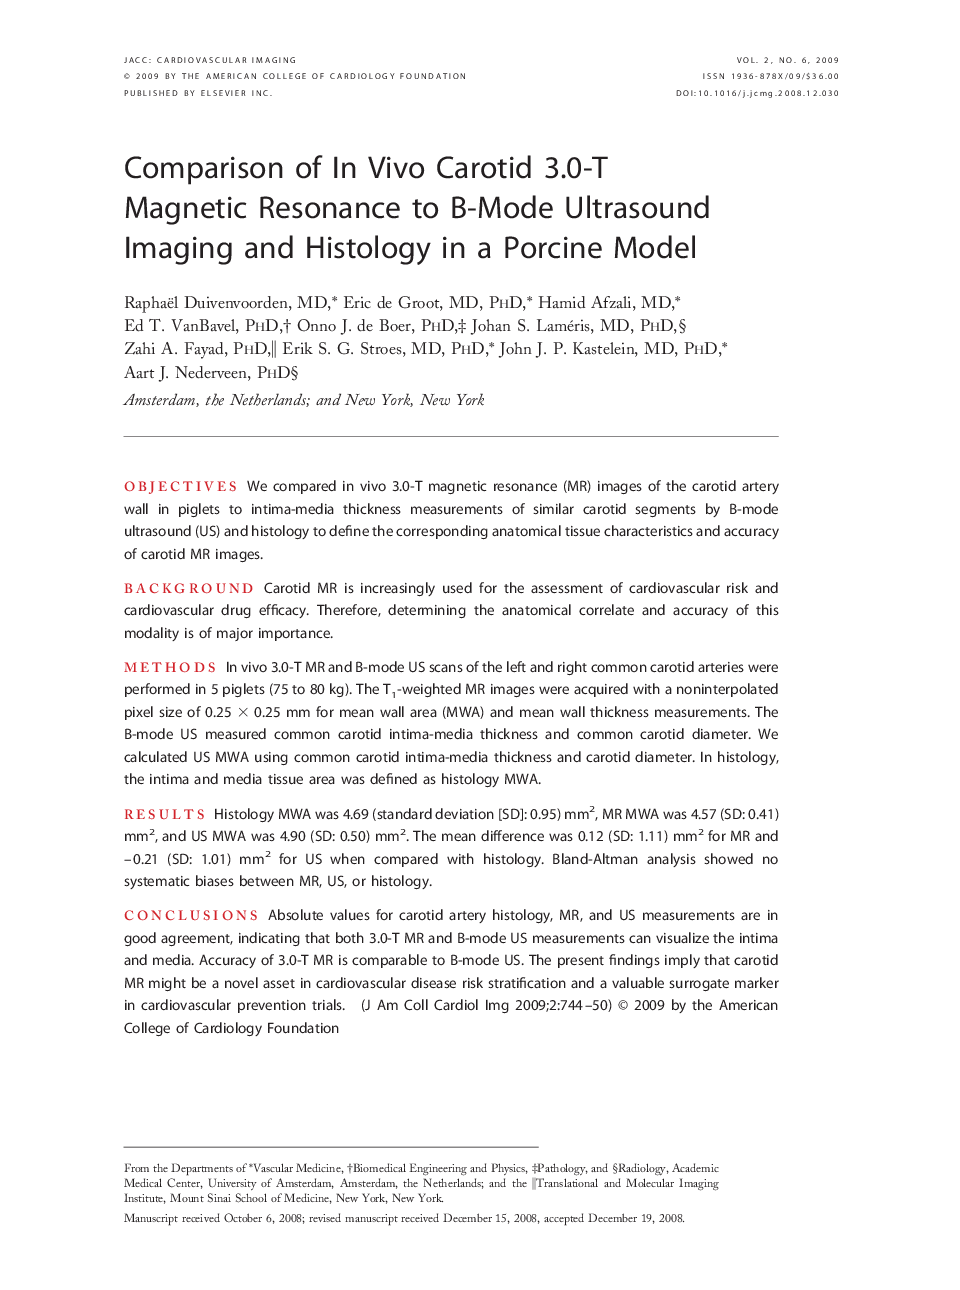 Comparison of In Vivo Carotid 3.0-T Magnetic Resonance to B-Mode Ultrasound Imaging and Histology in a Porcine Model